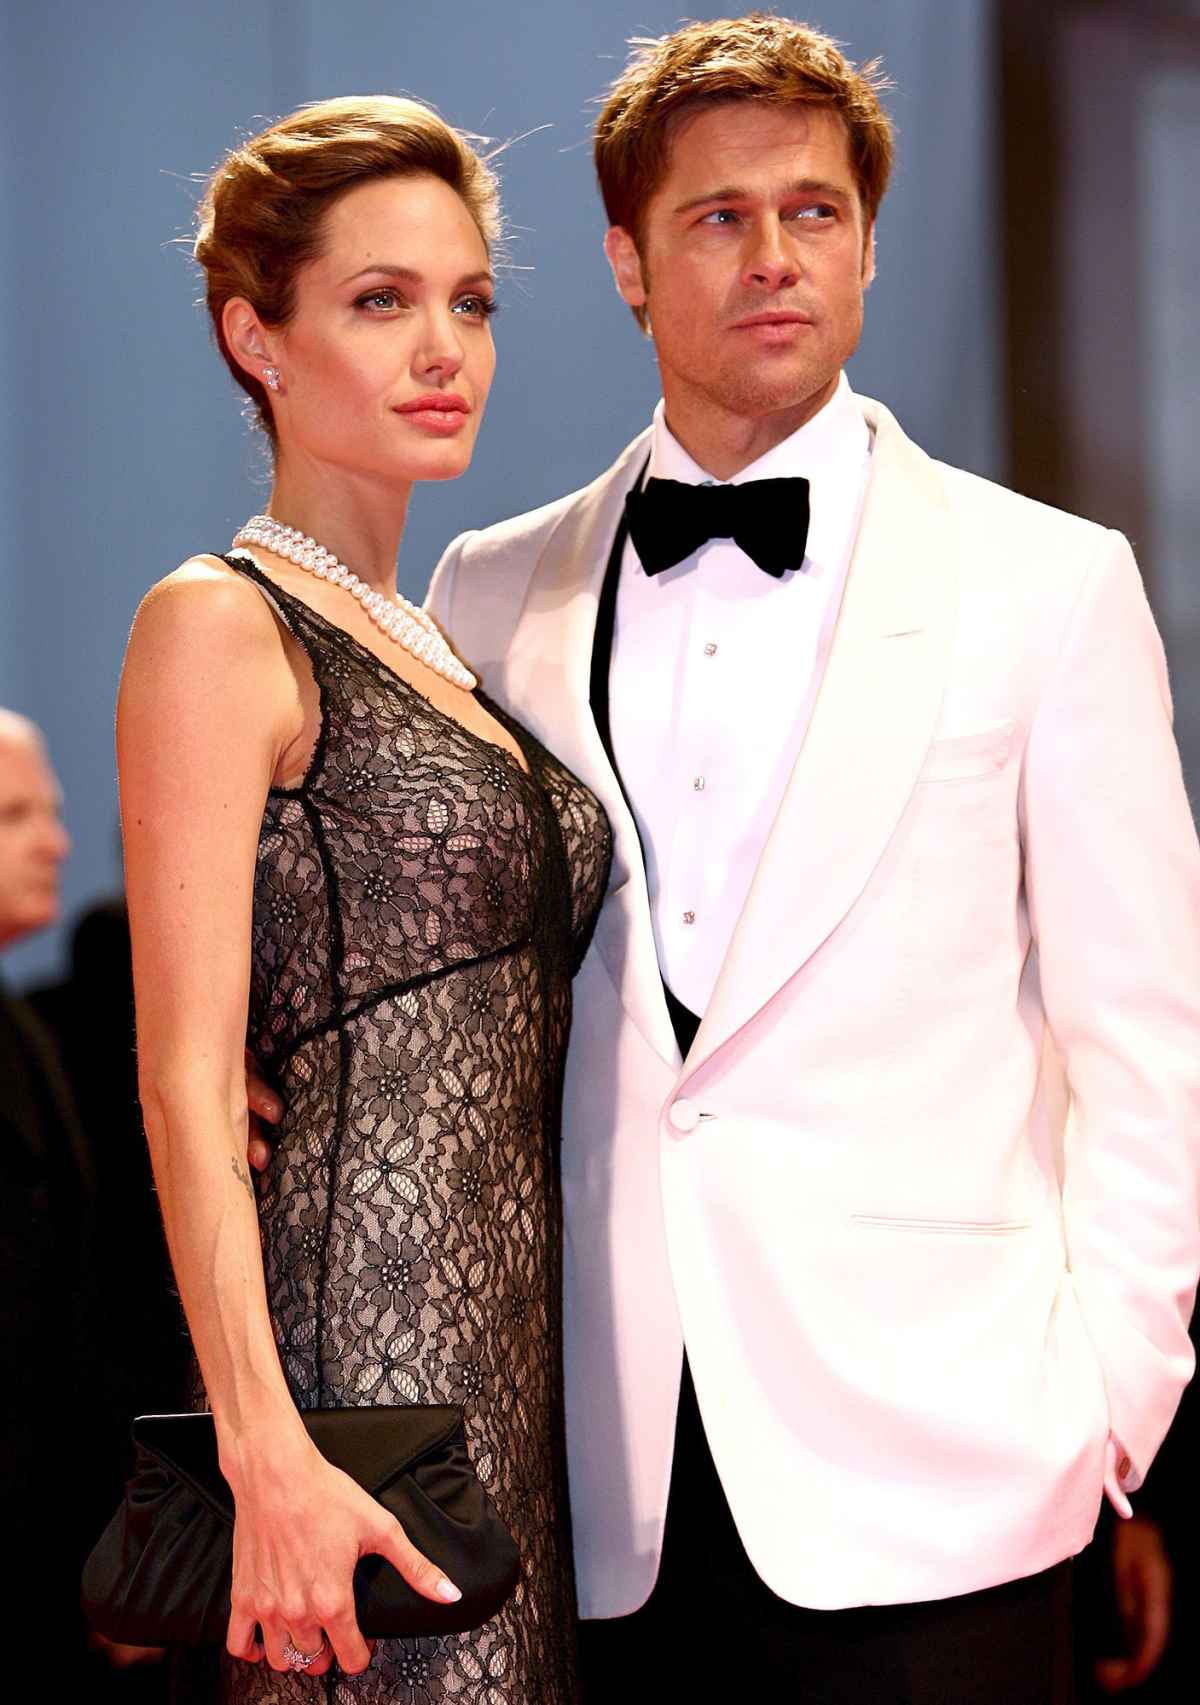 The Evolution of Brad Pitt and Angelina Jolie's Style